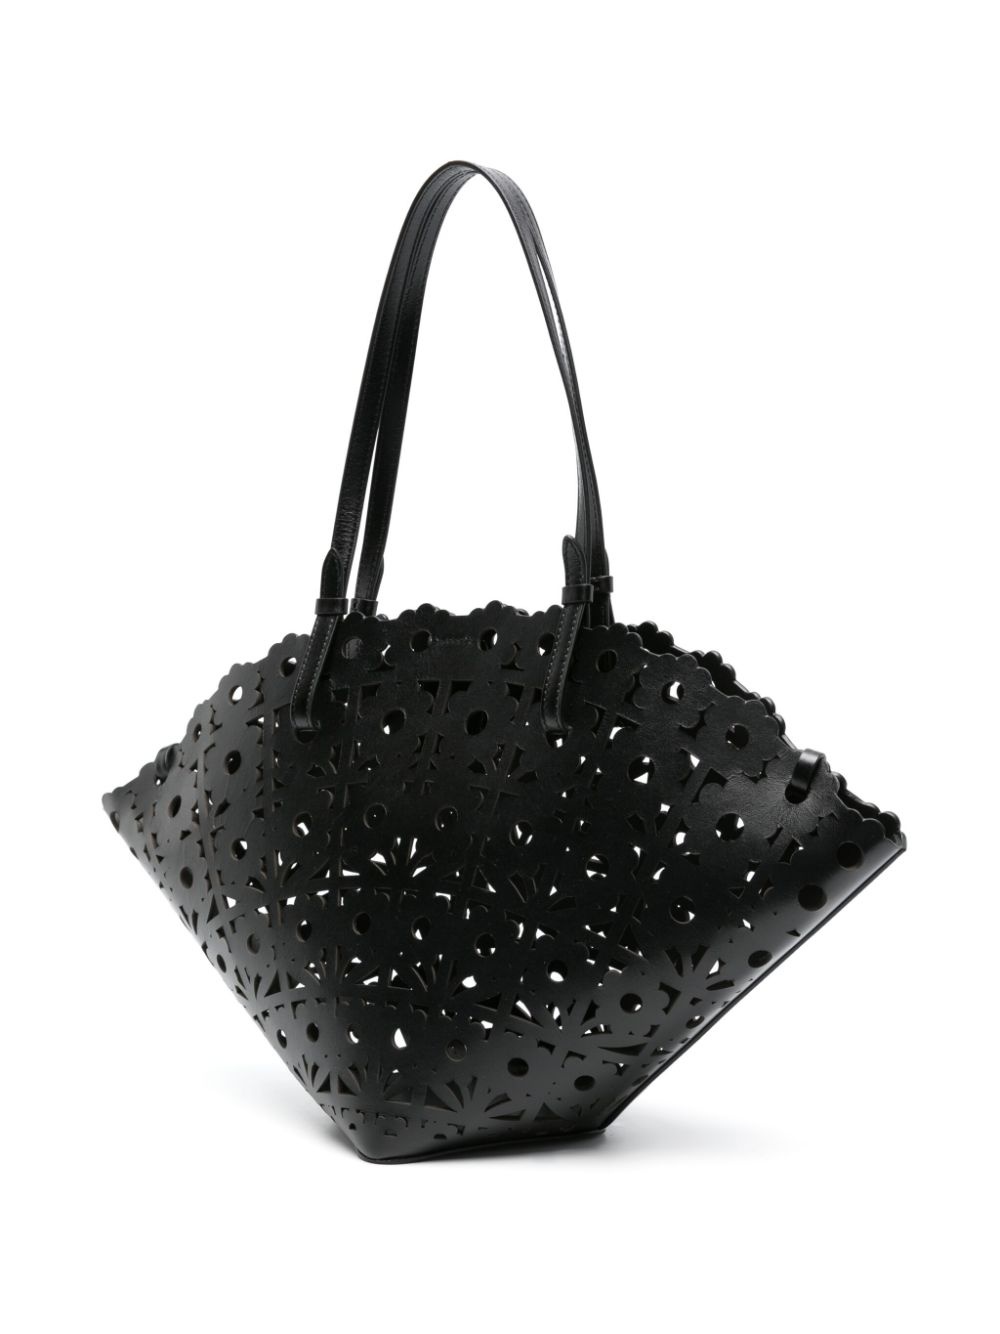 Daisy leather tote bag - 3